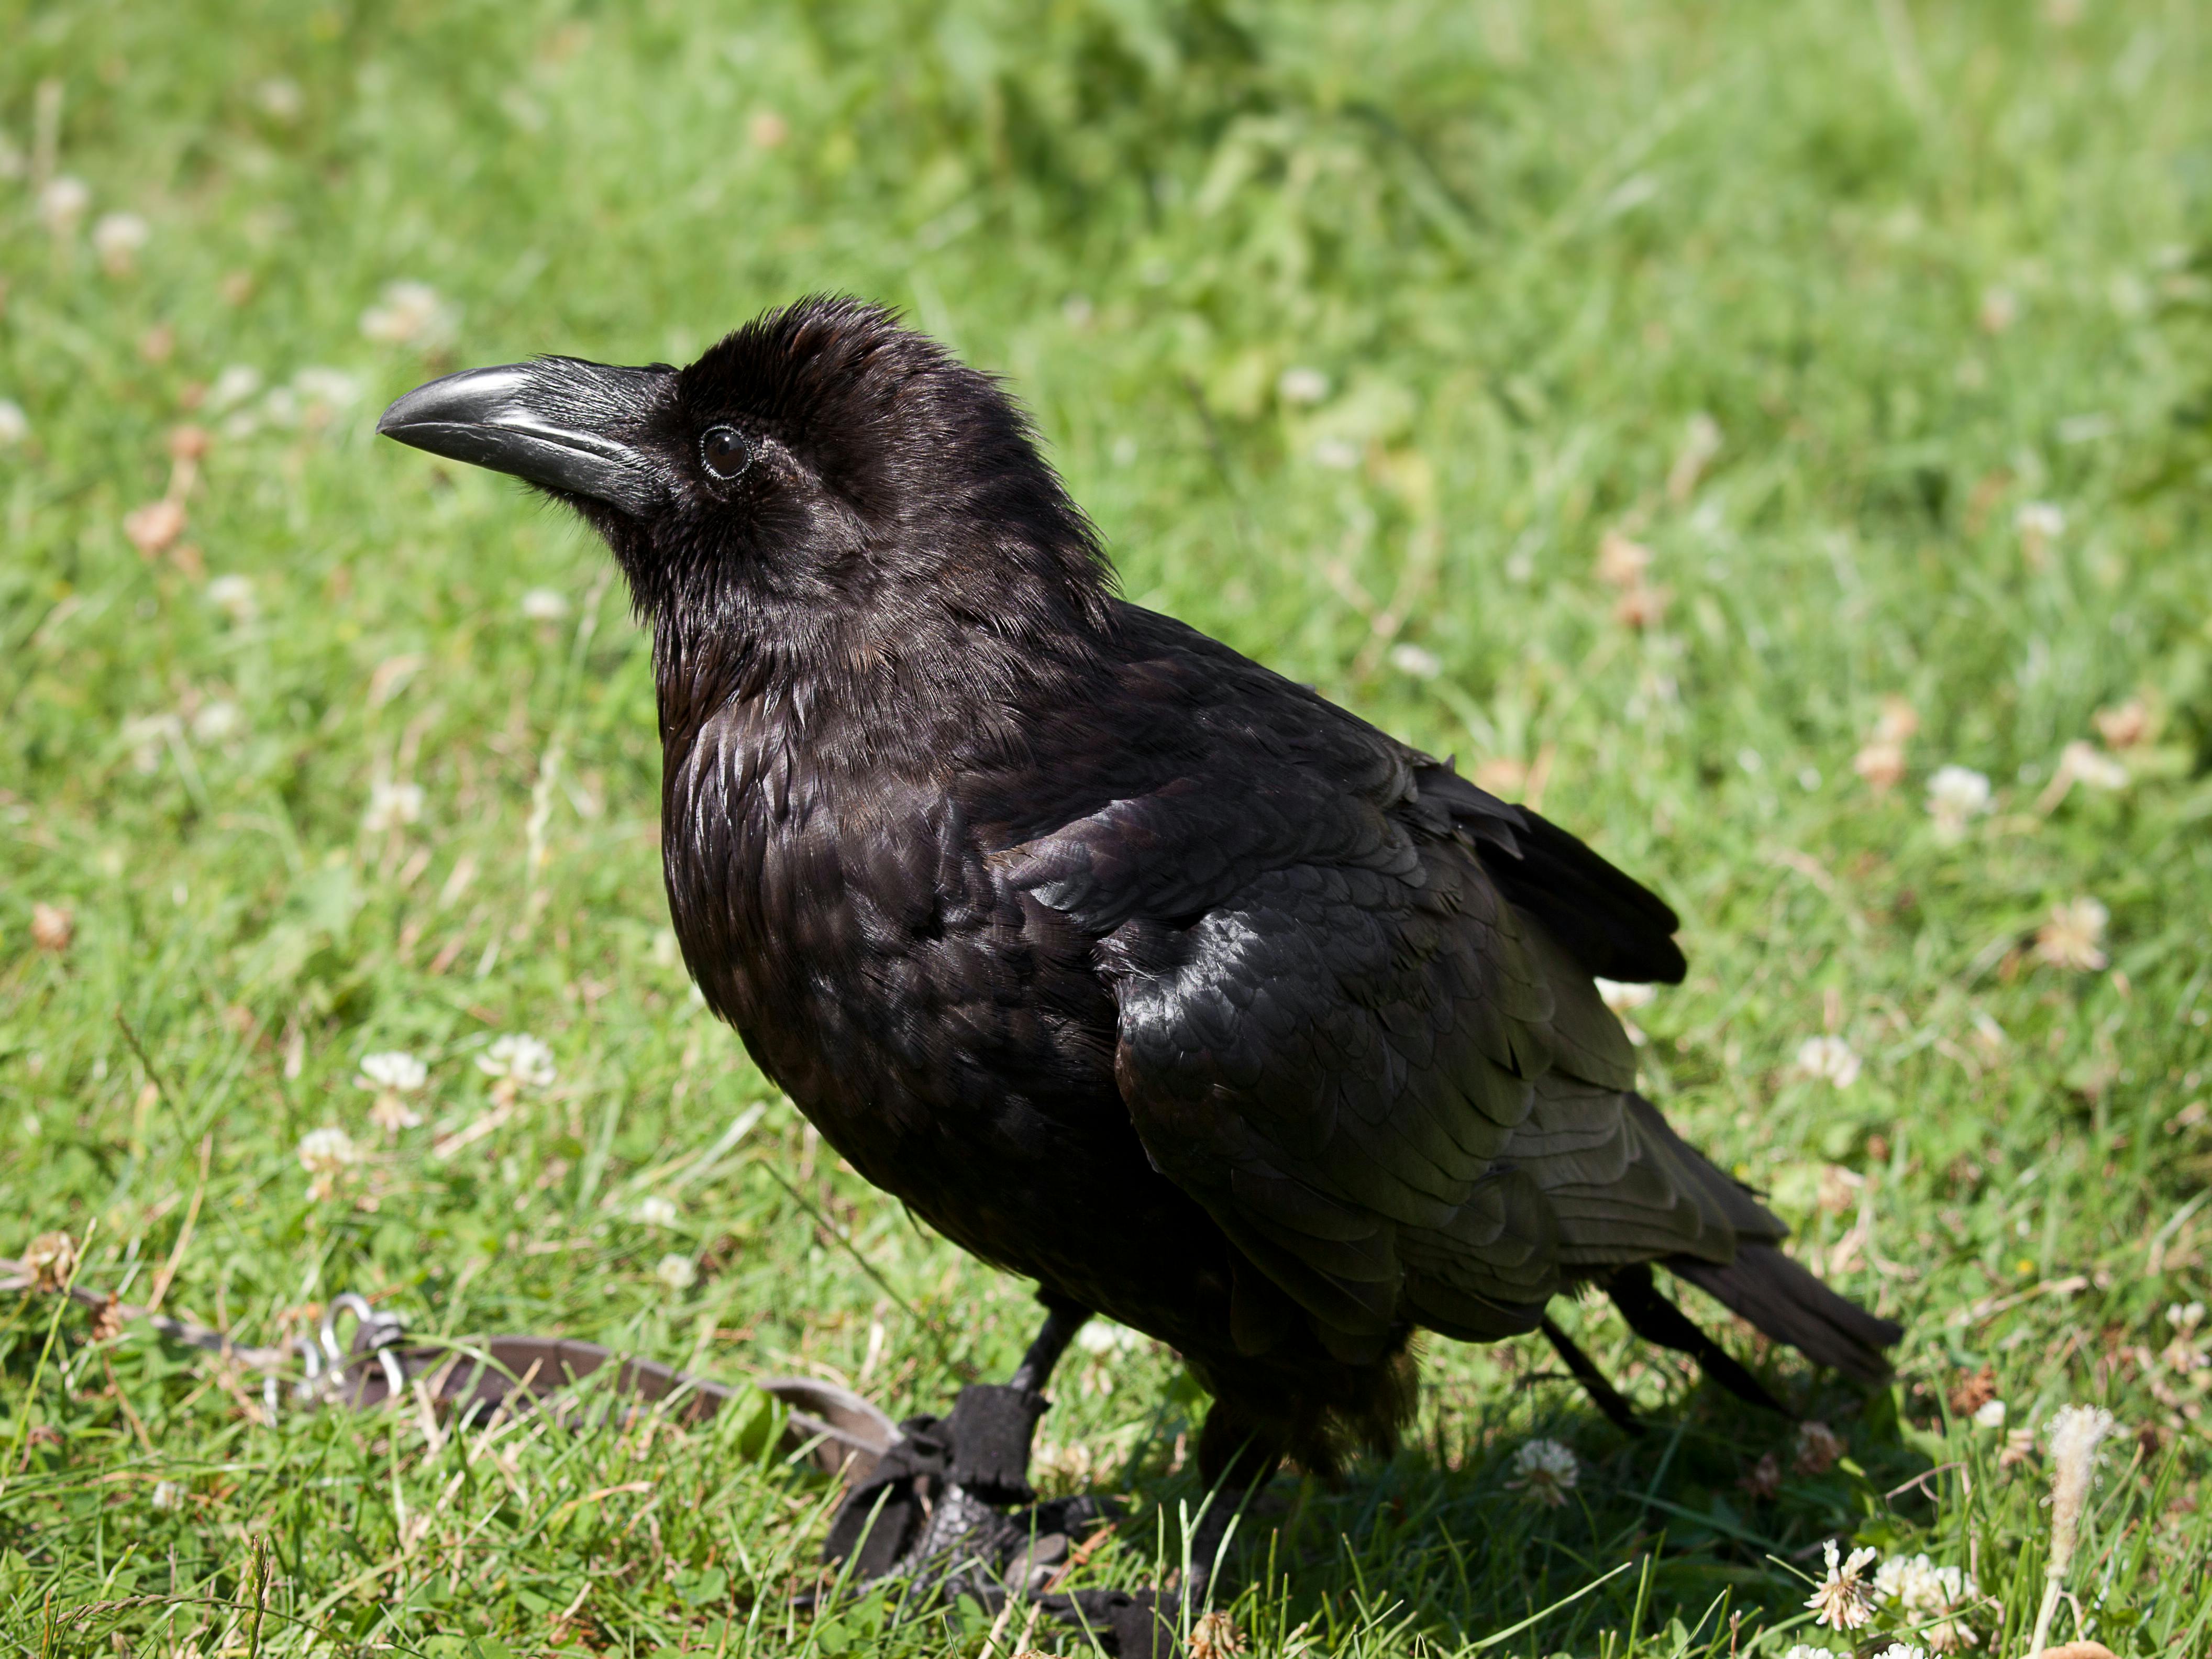 tame raven sitting on the grass